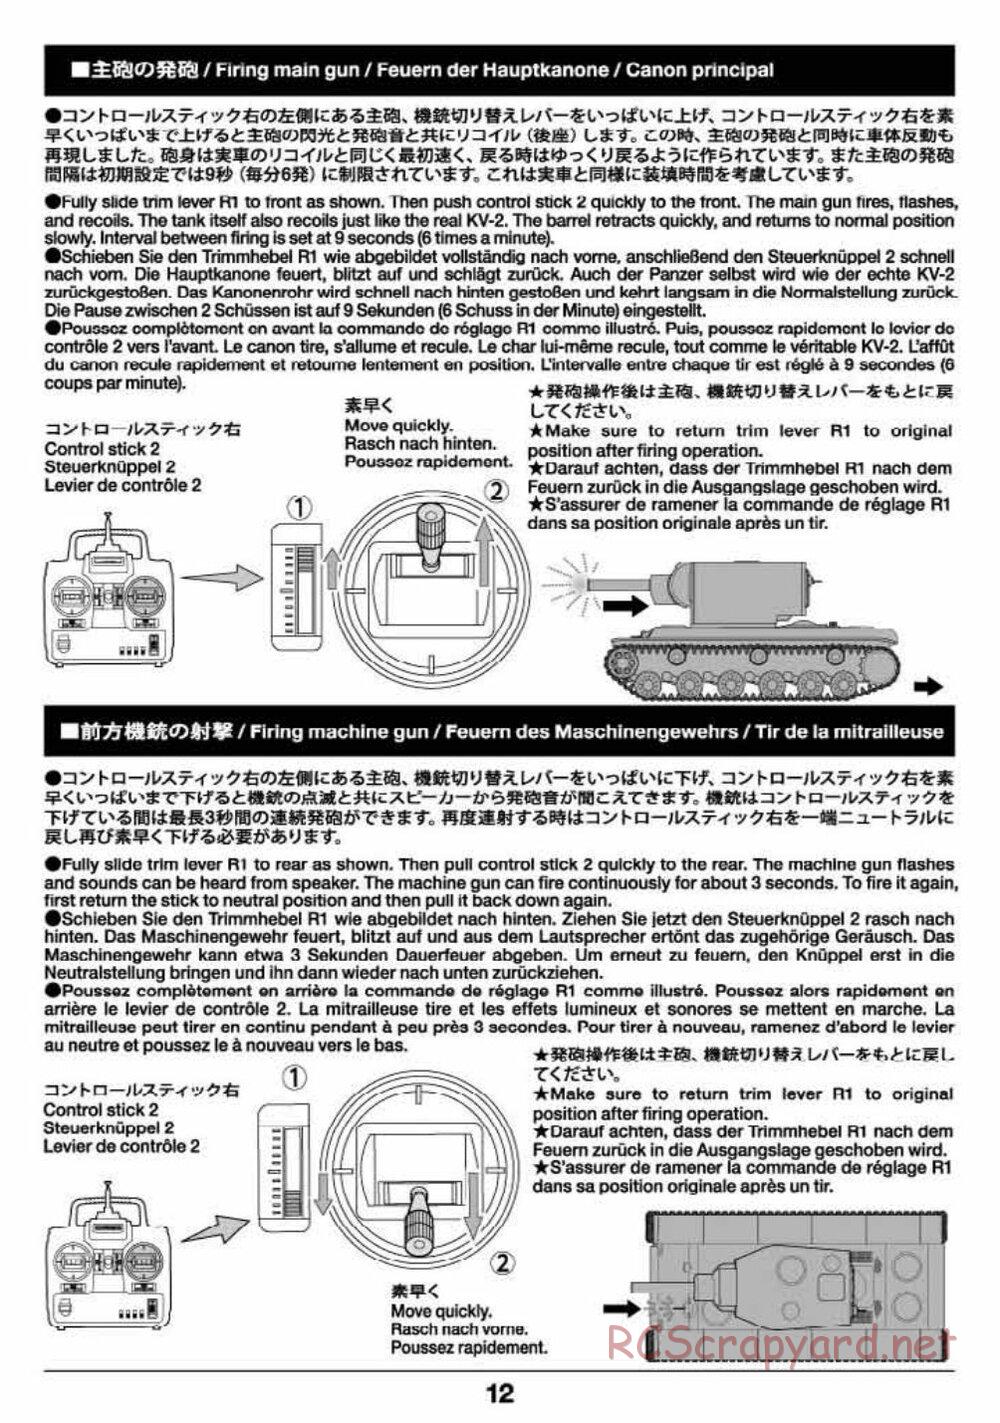 Tamiya - Russian Heavy Tank KV-2 Gigant - 1/16 Scale Chassis - Operation Manual - Page 12